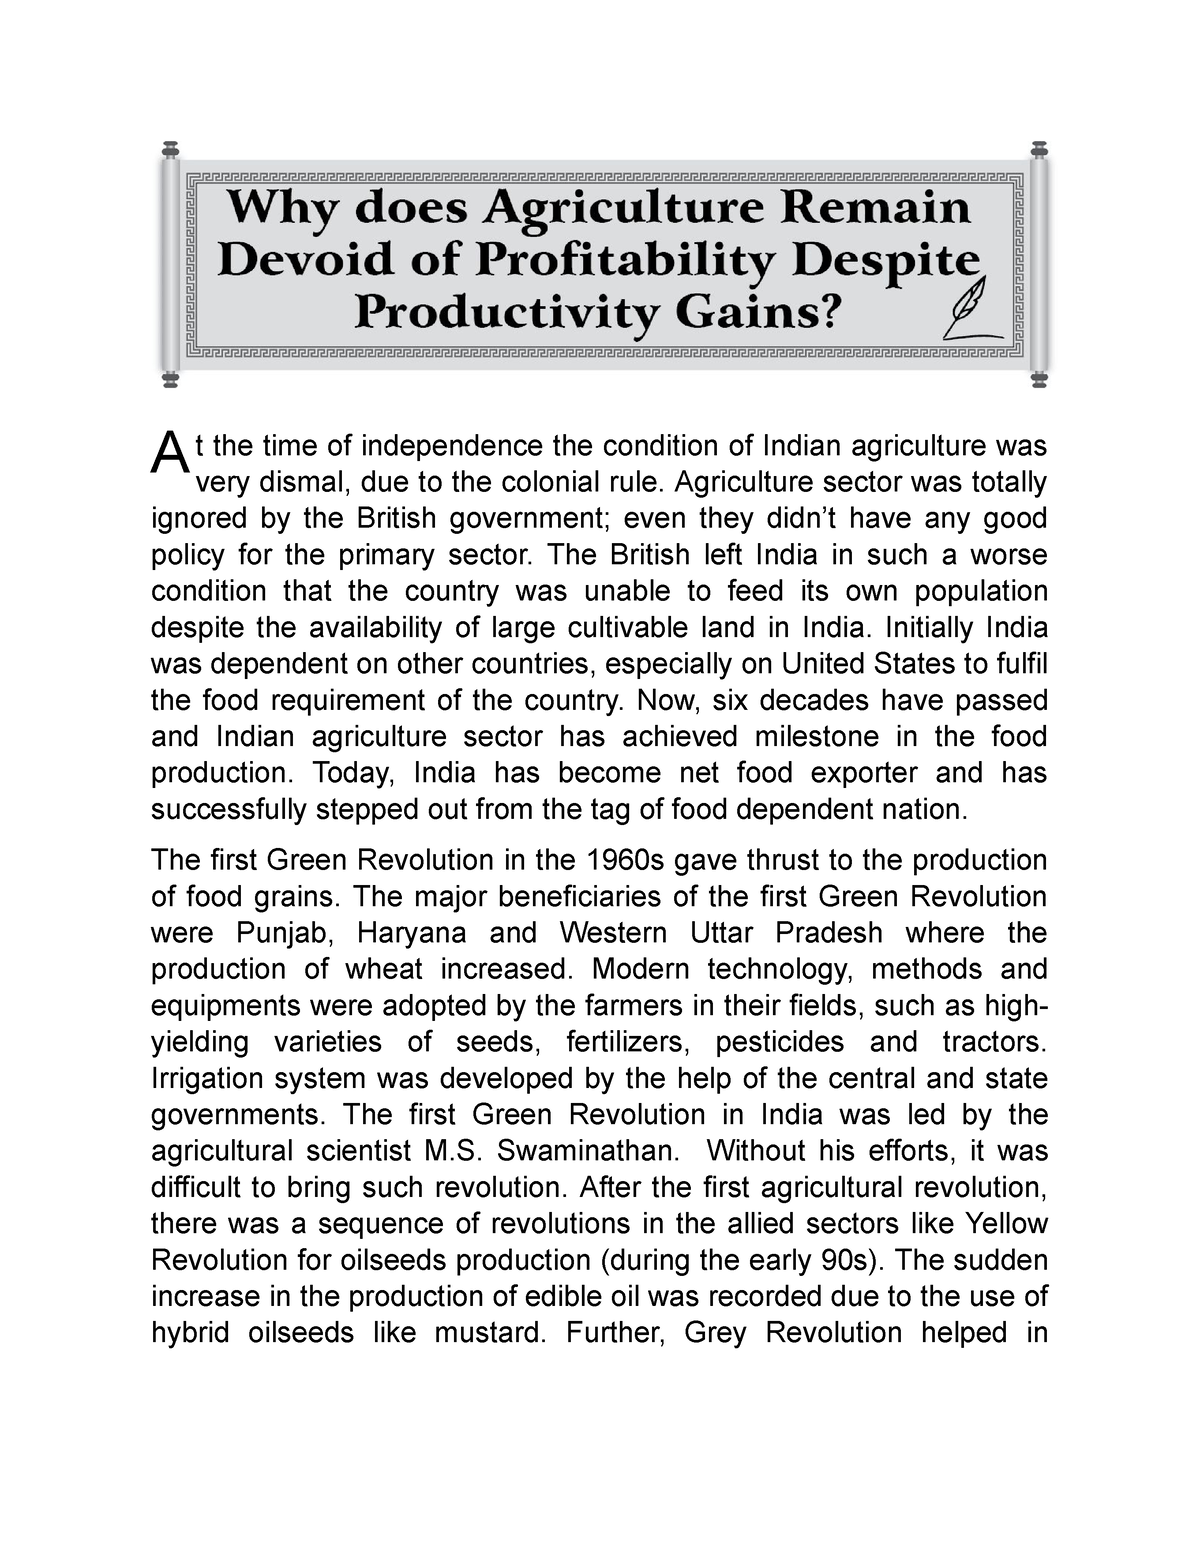 essay about agricultural